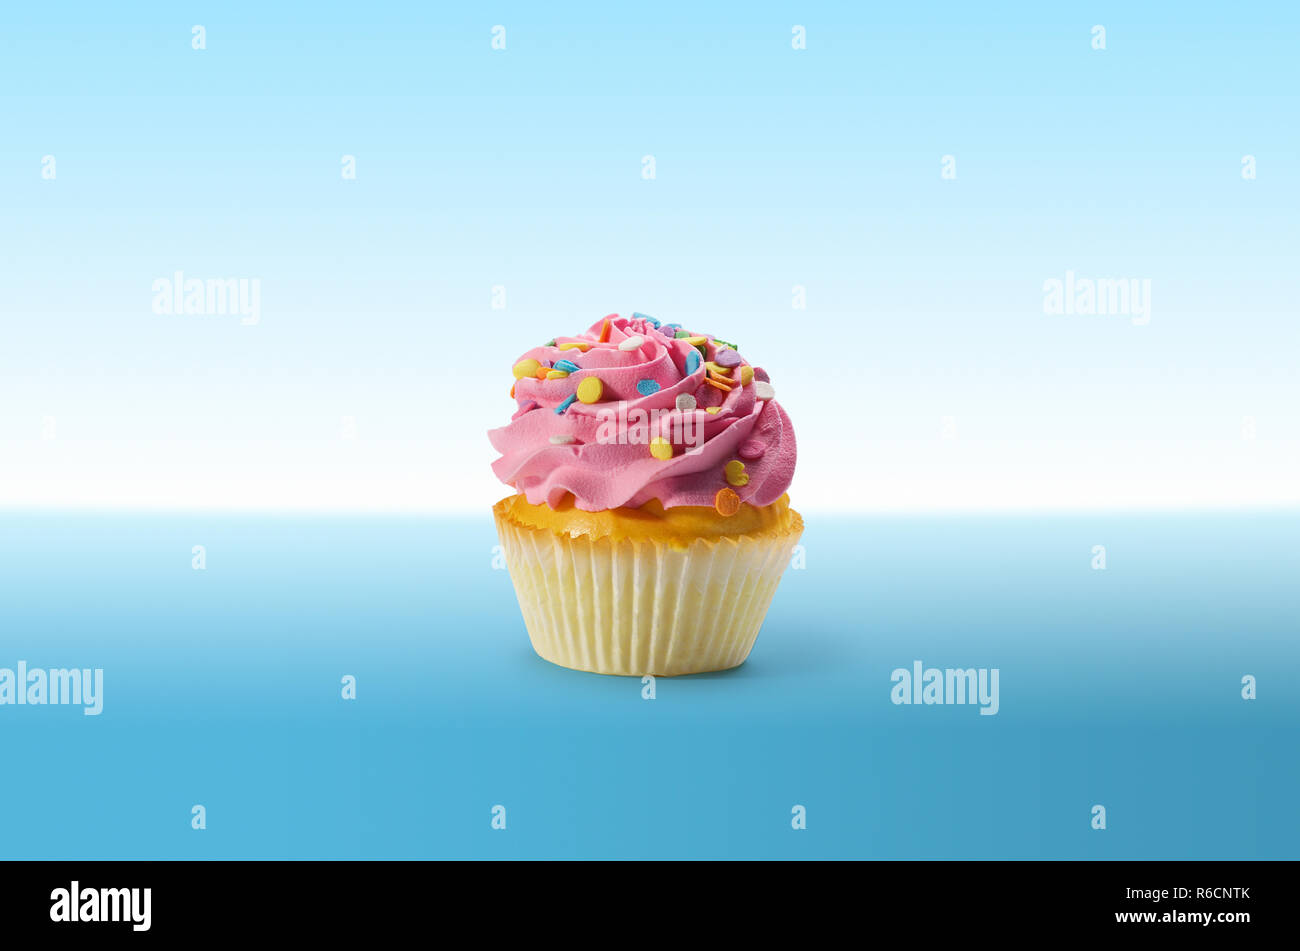 Cupcake with frosting and colourful sweets on a blue surface Stock Photo